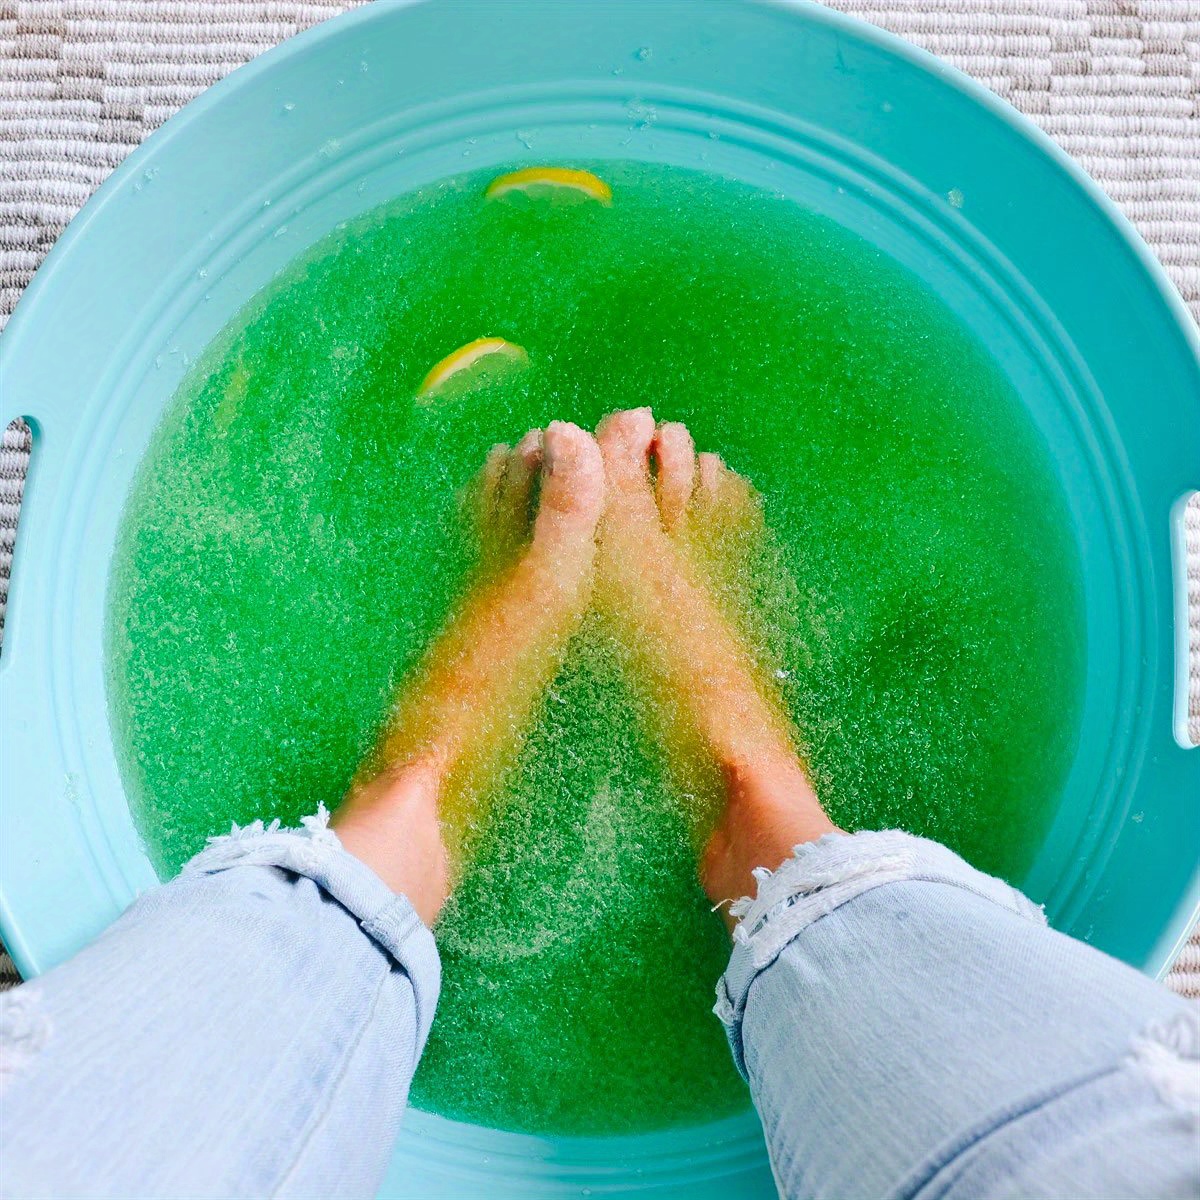 Jelly Pedicure Packs - Pedicure Foot Soak For Dry Cracked Feet